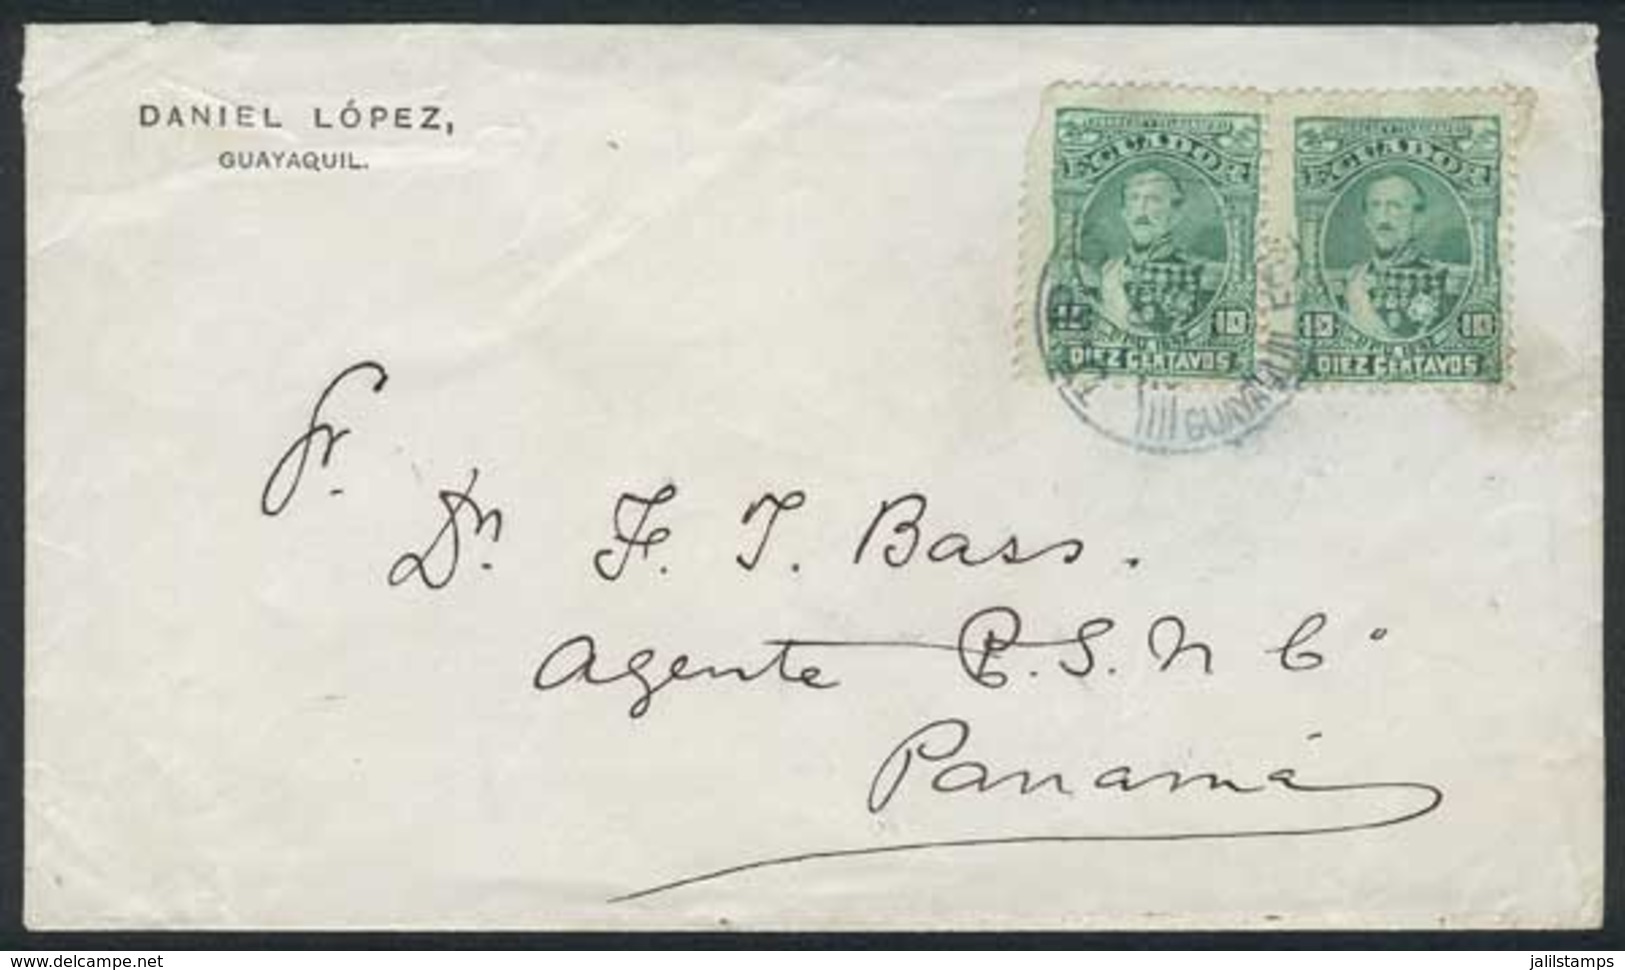 689 ECUADOR: Cover Franked With 10c. Pair (Sc.26), Sent From Guayaquil To Panamá On 20/A - Ecuador